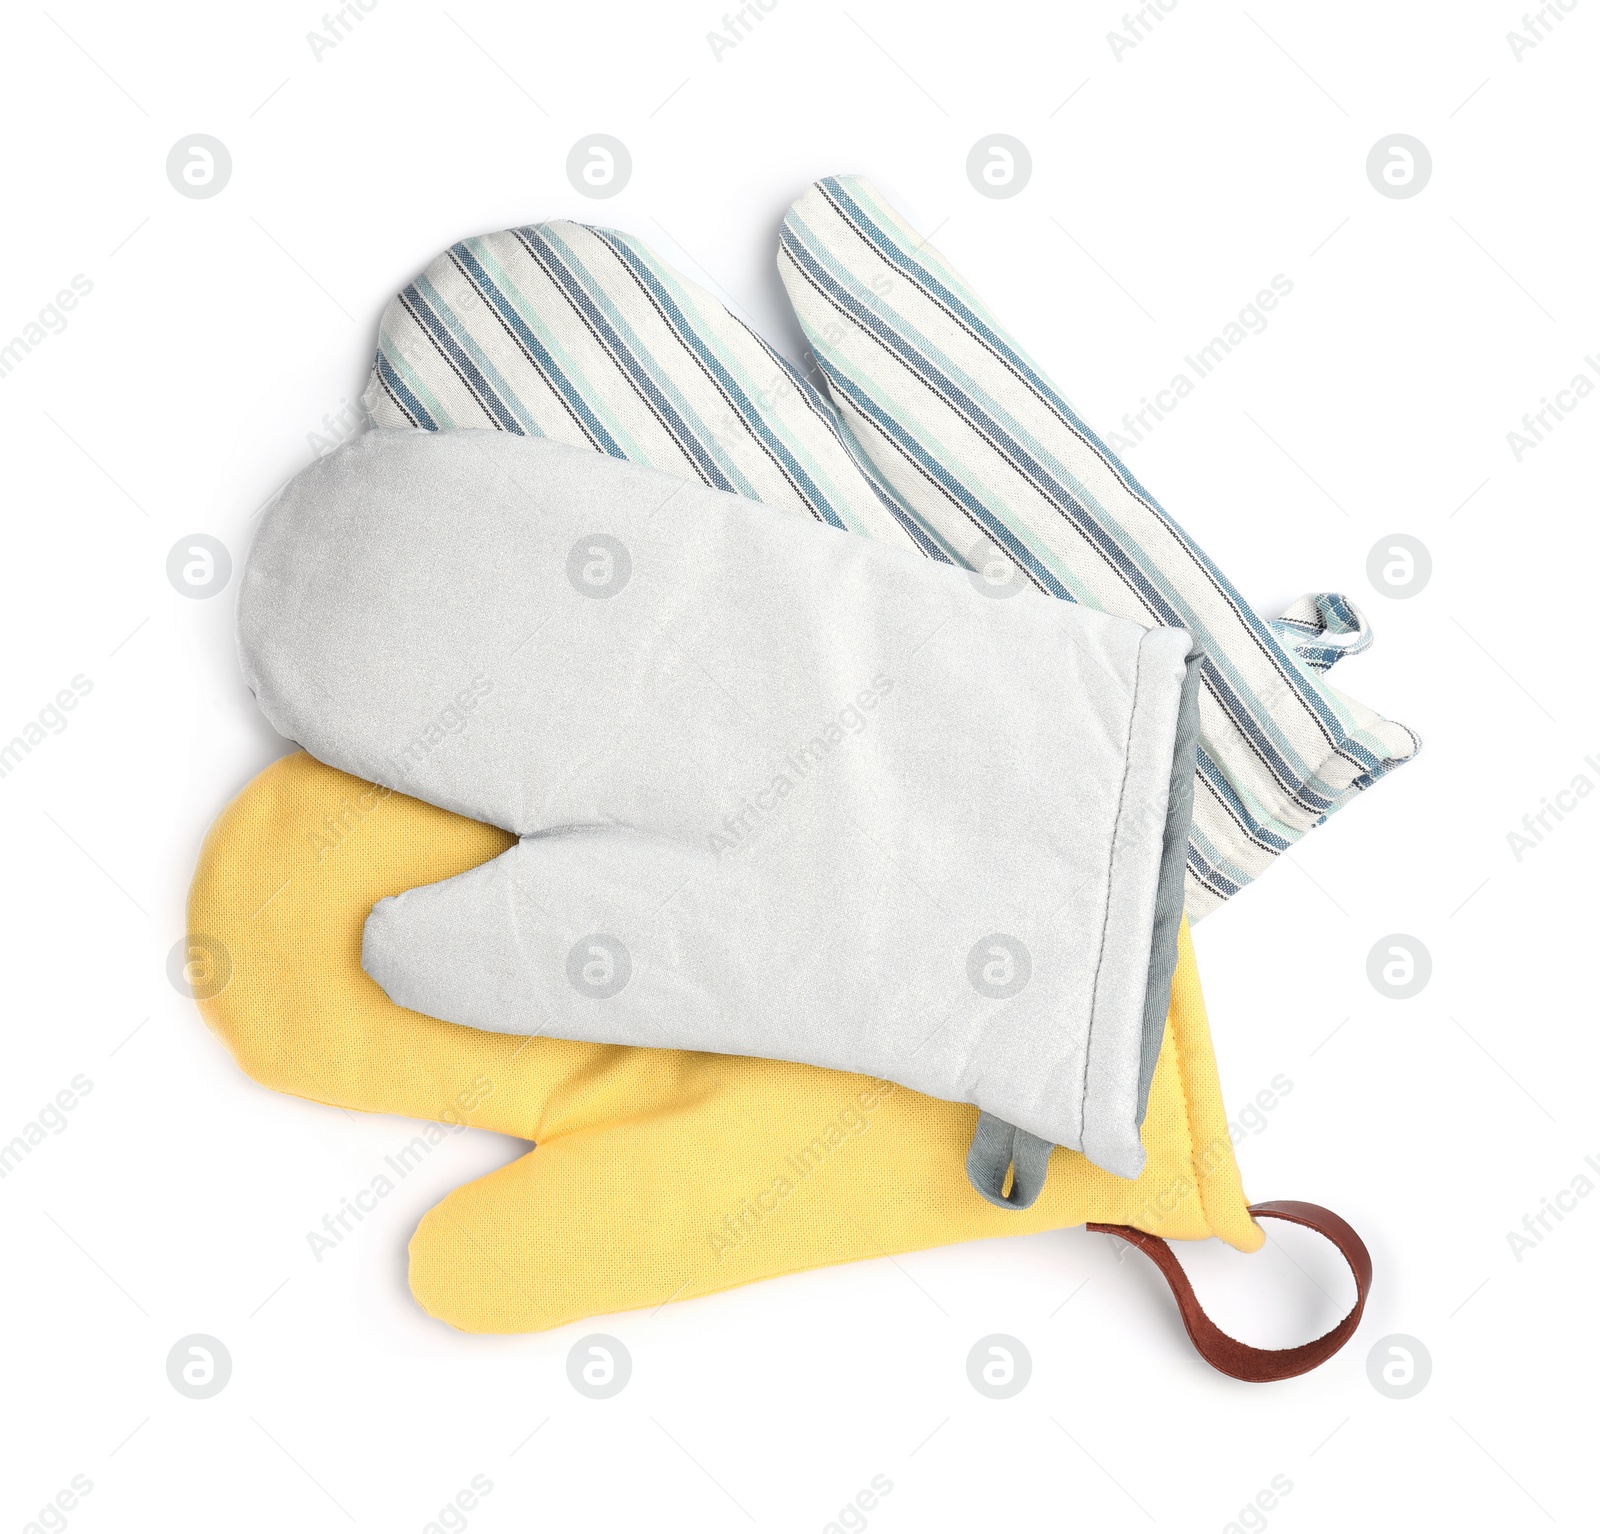 Photo of Oven gloves for hot dishes on white background, top view